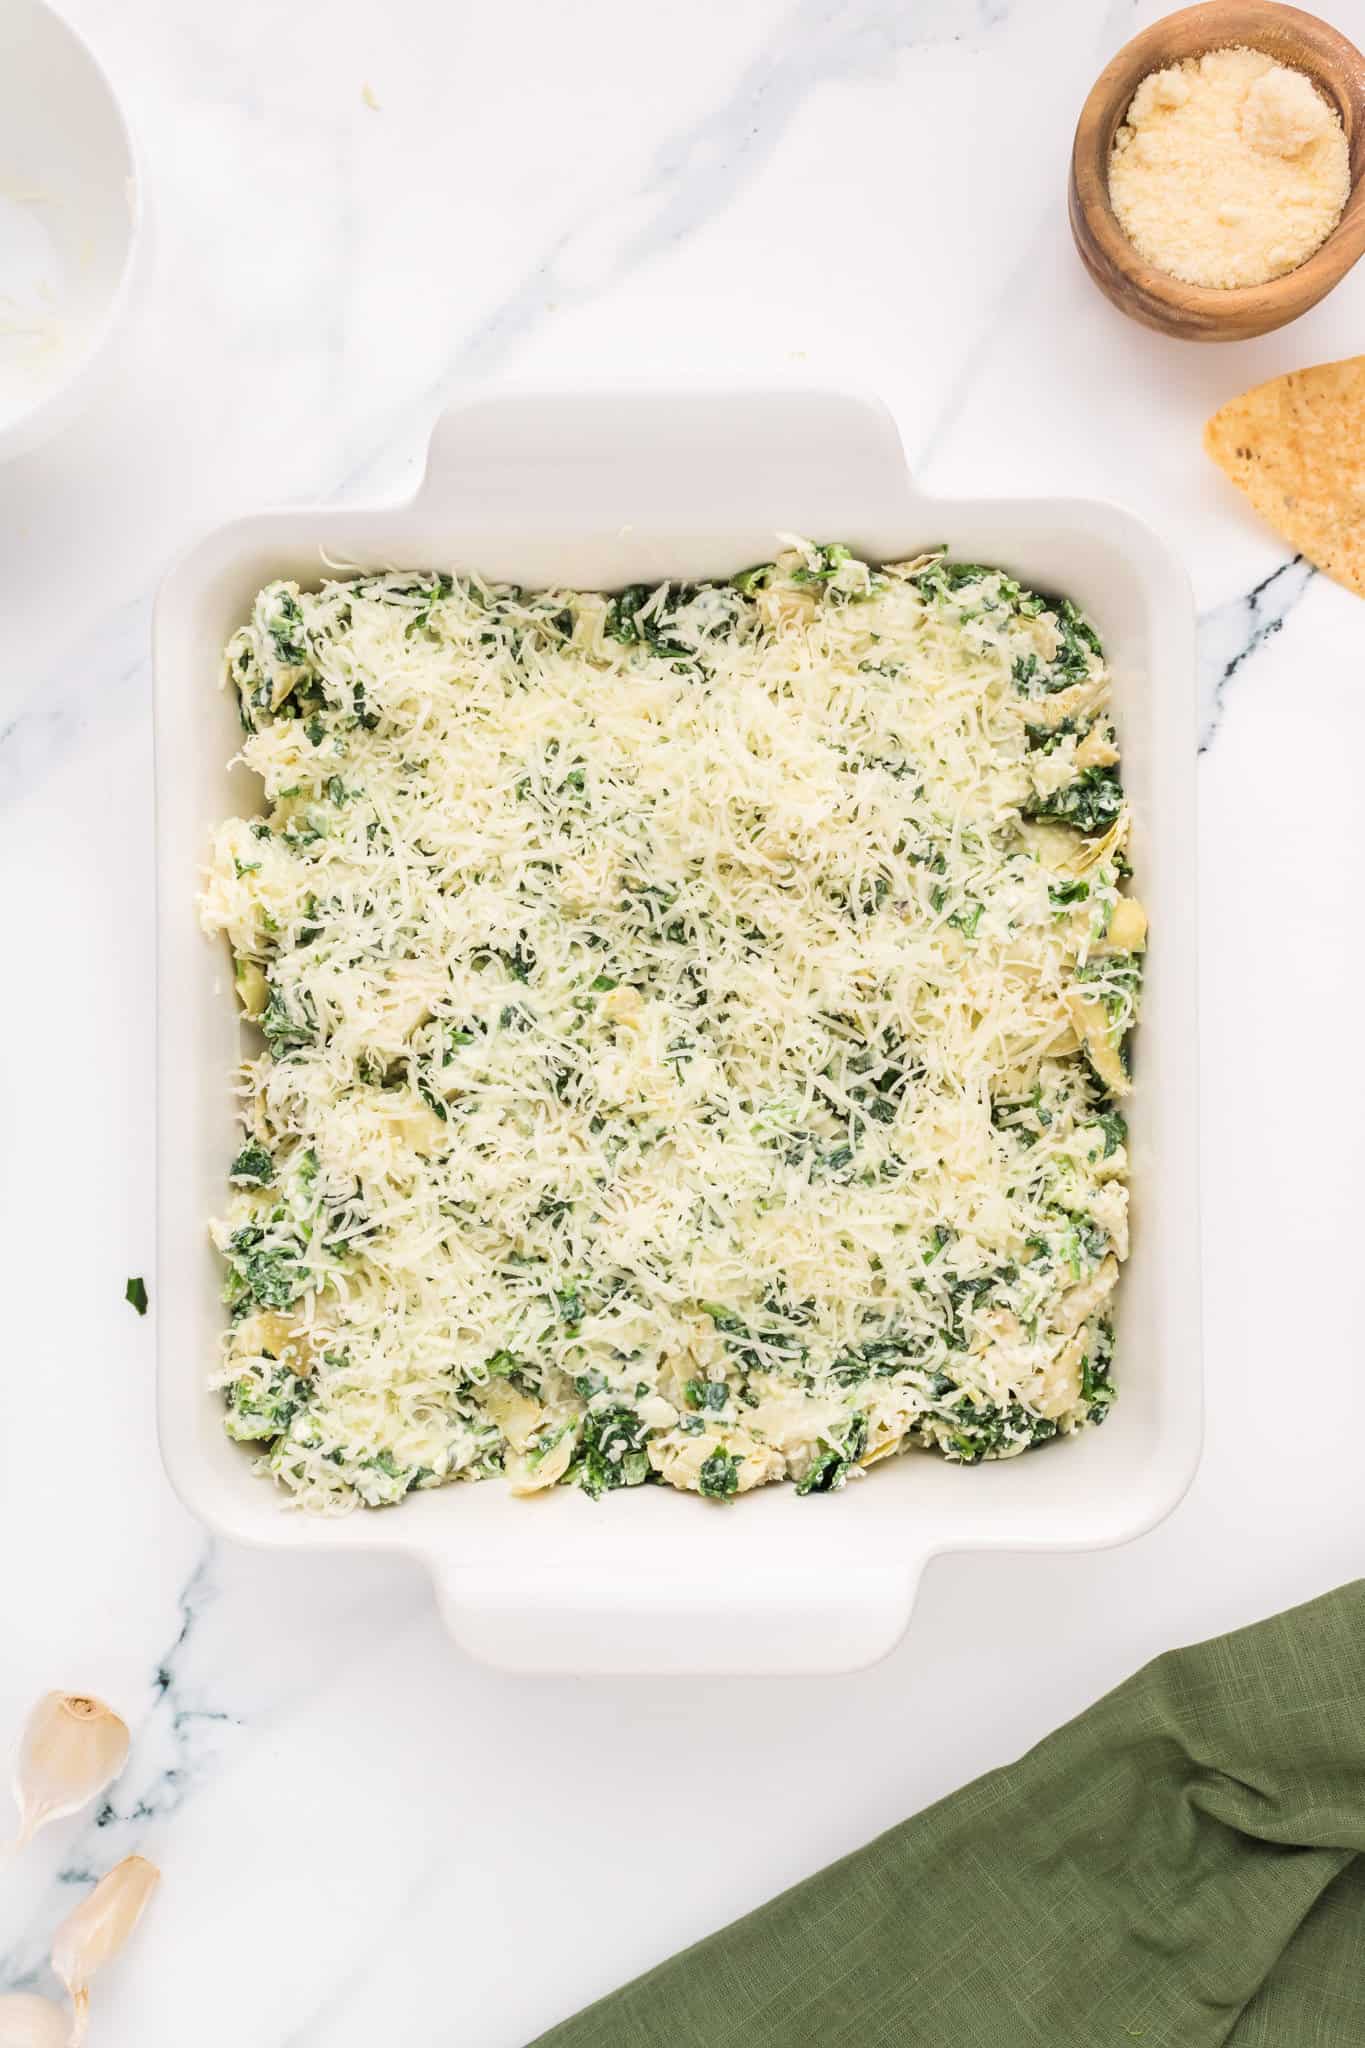 shredded mozzarella cheese on top of creamy spinach and artichoke mixture in a baking dish